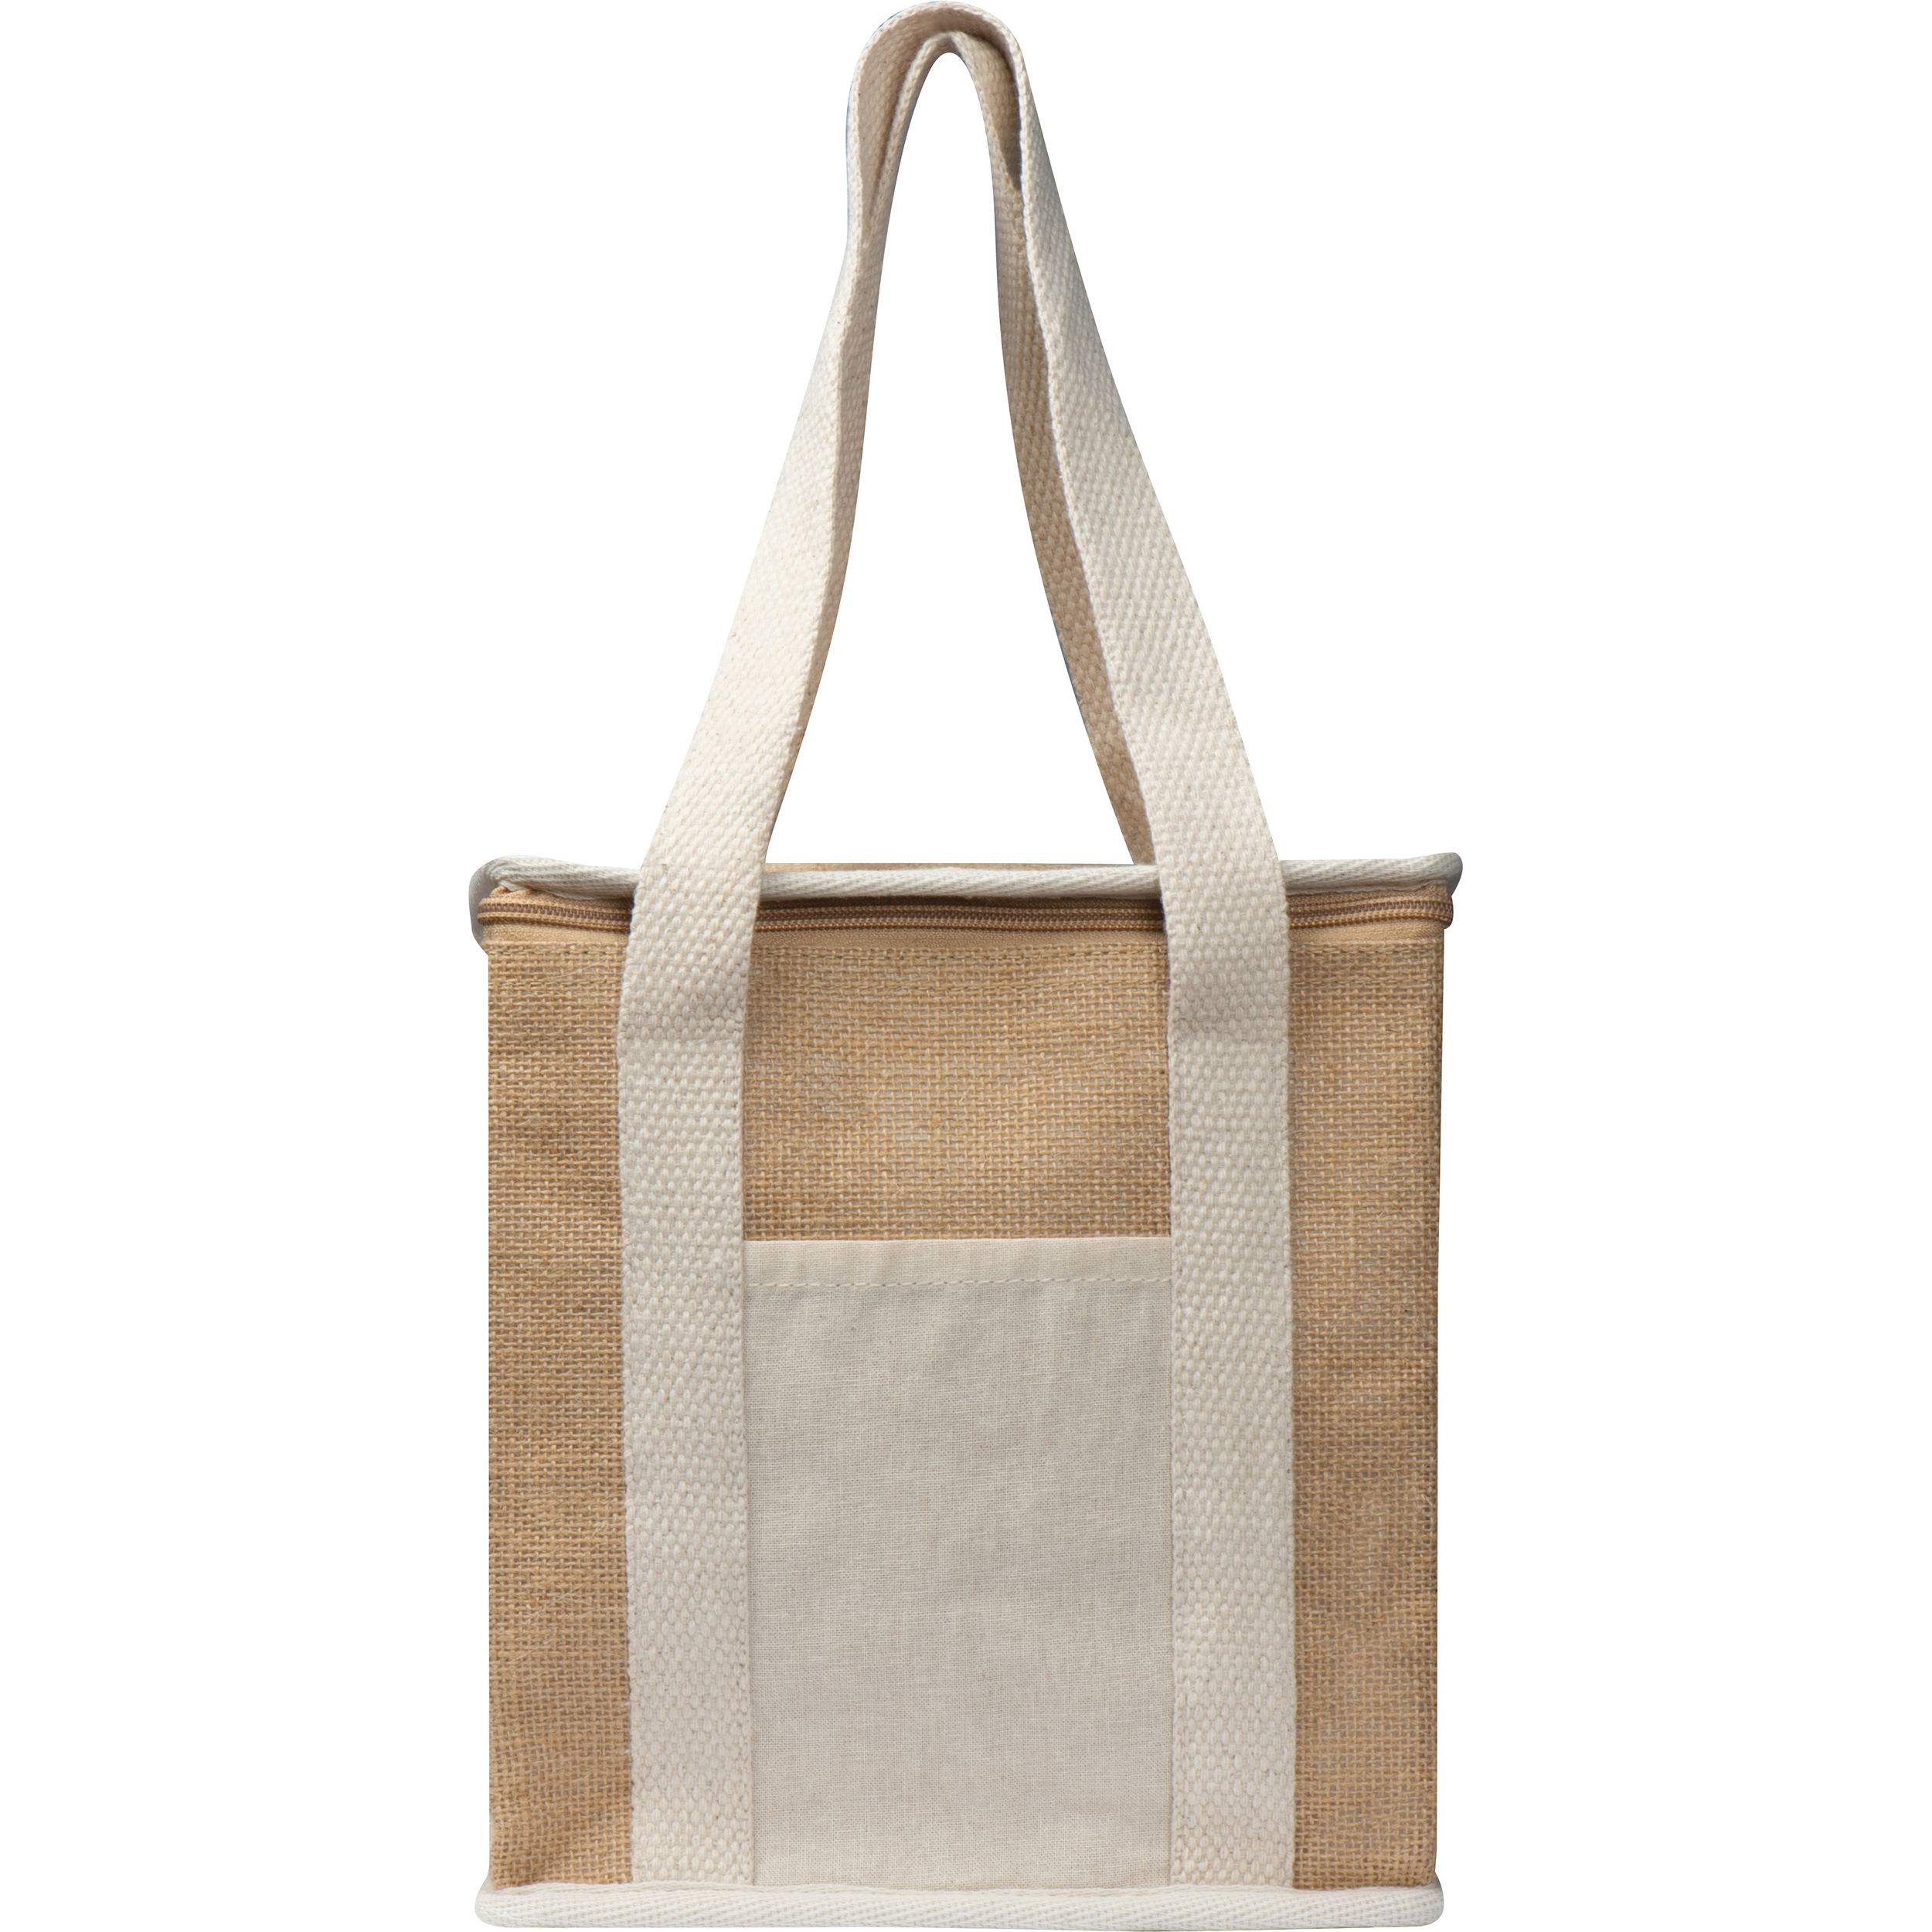 6 pack Details about   Recycled Canvas Totes 